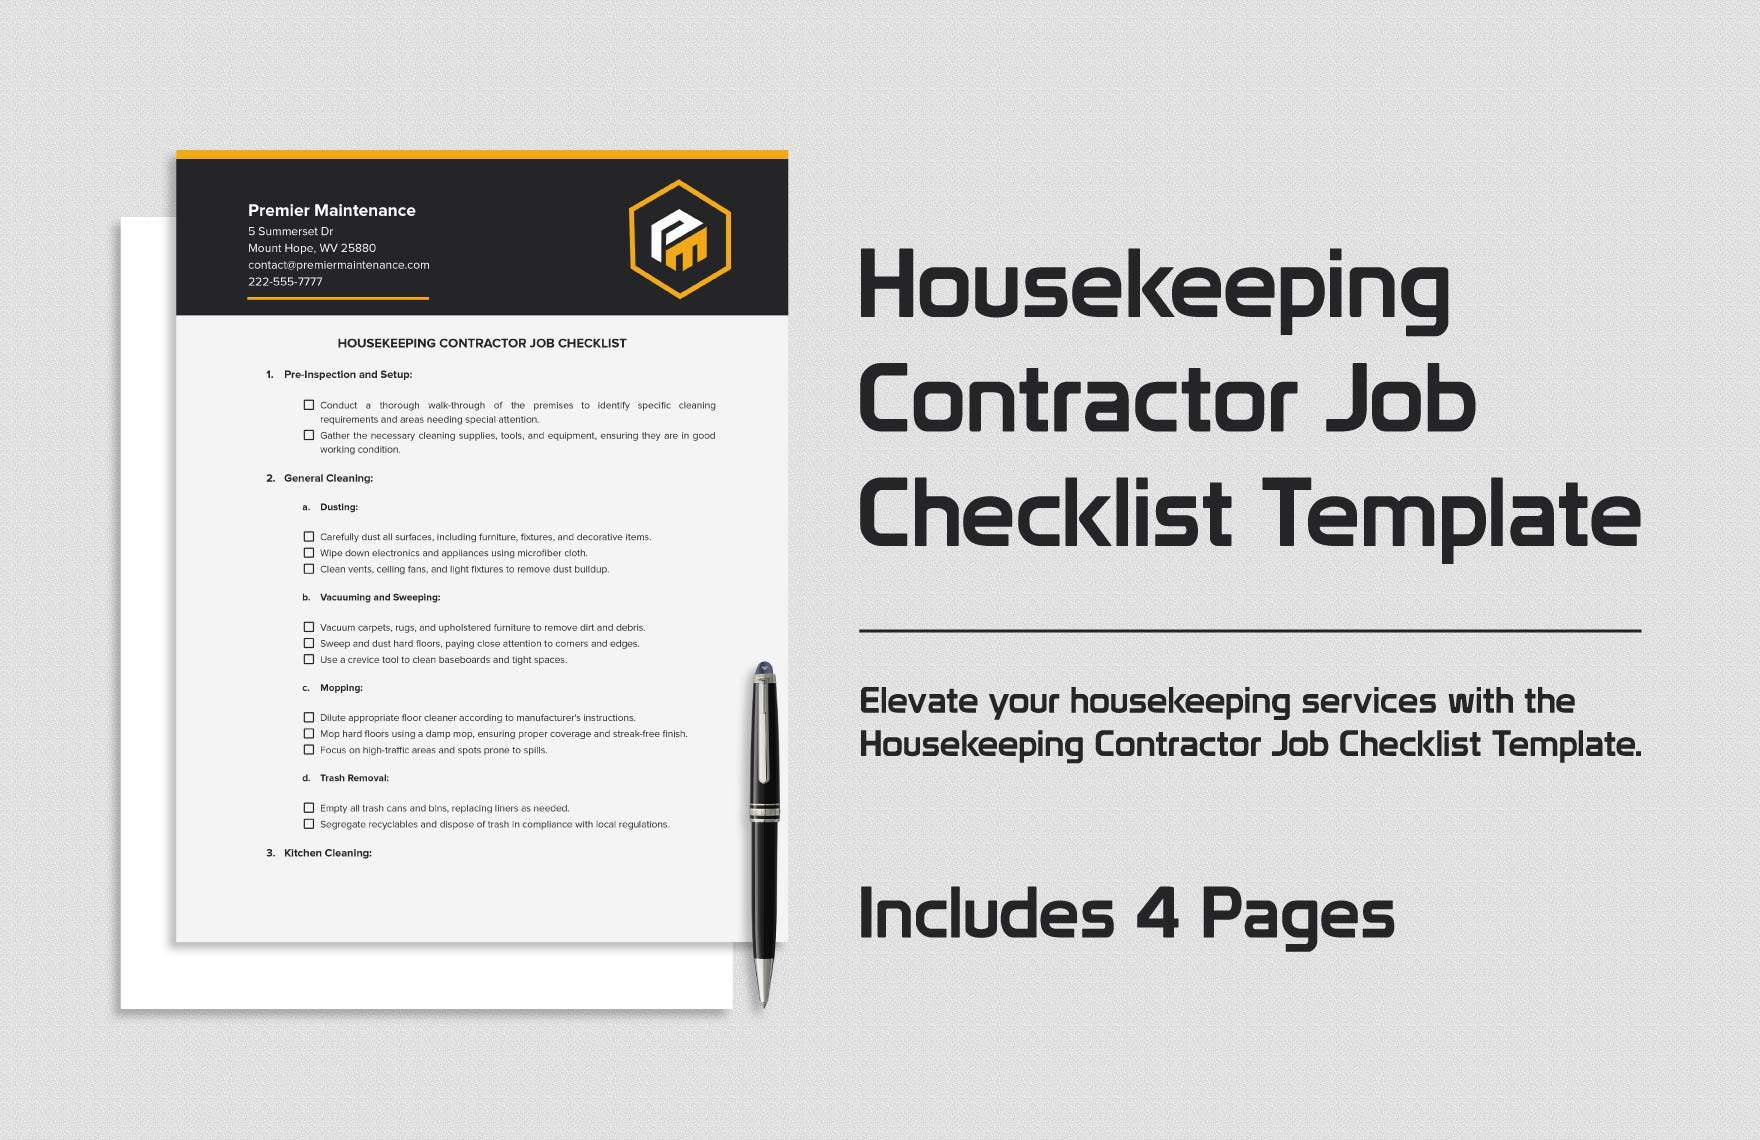 Housekeeping Contractor Job Checklist Template in Word, Google Docs, PDF